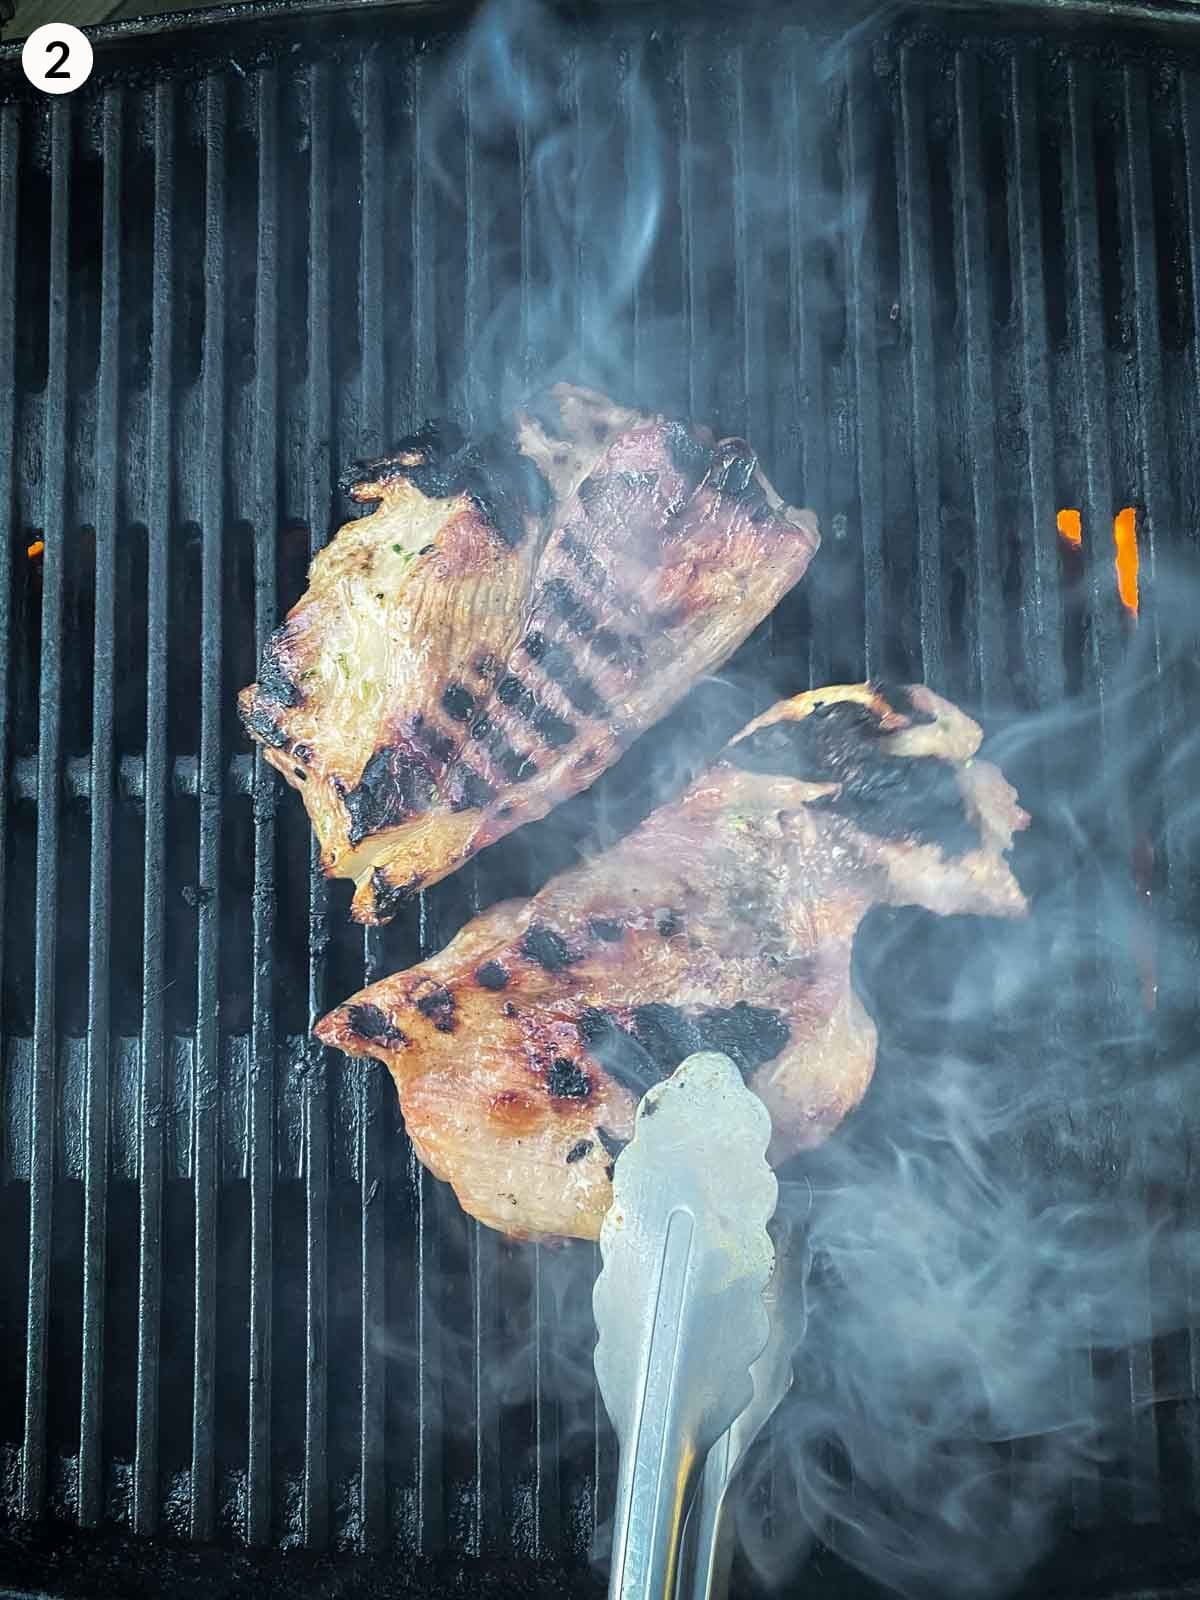 two pieces of pork neck cooking on a grill with steam coming up from the bbq